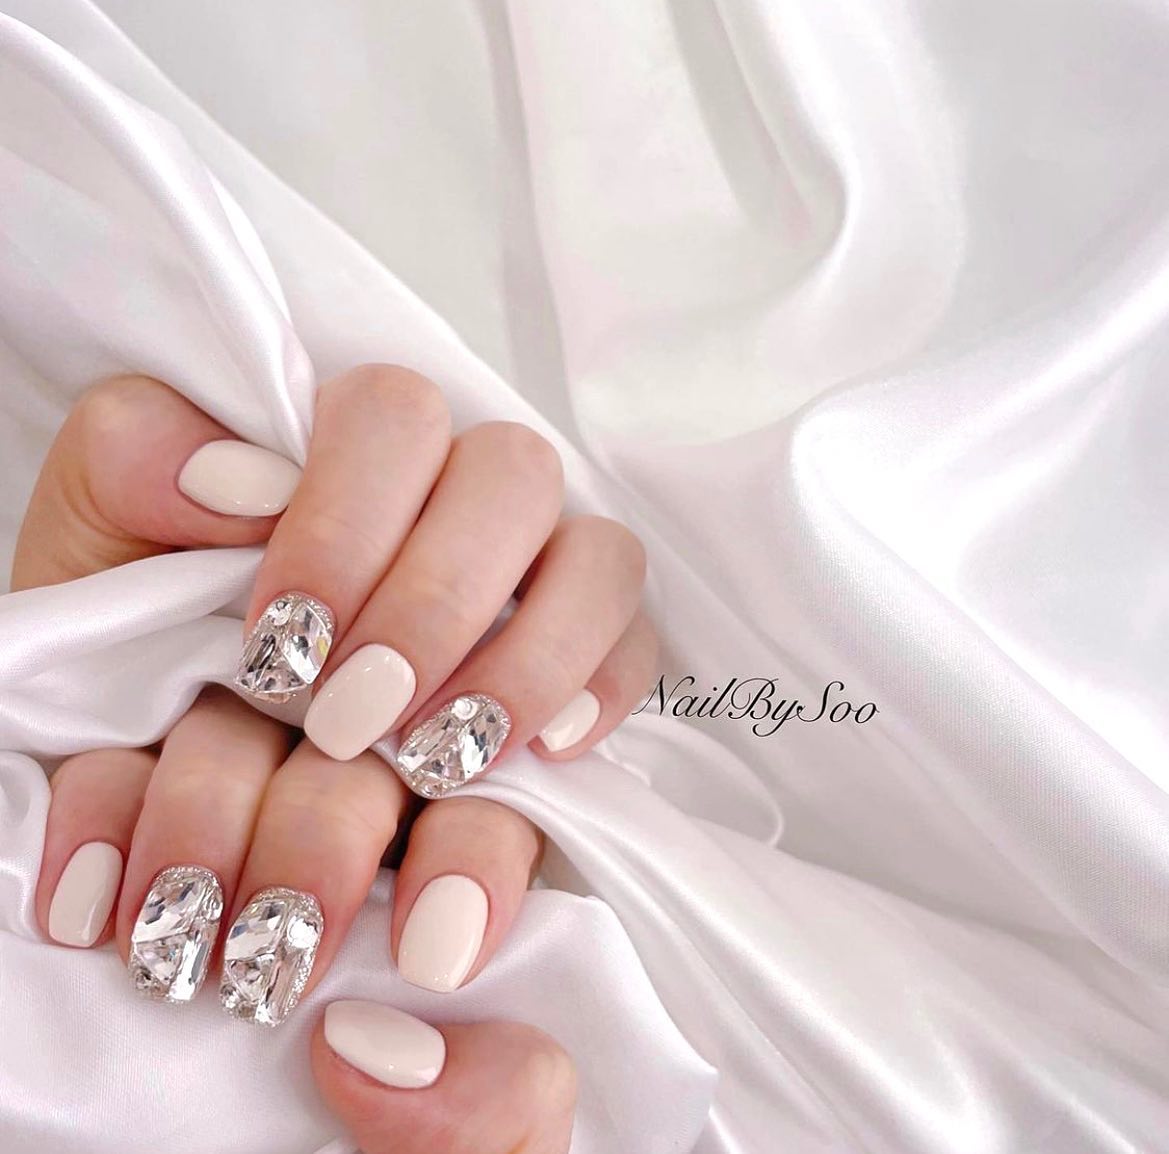 Short square nails are quite simple and it is easy to achieve a chic look with them. In order to achieve a cooler look, all you need to do is cover some of your nails with shiny stones. No one will take their eyes off you.